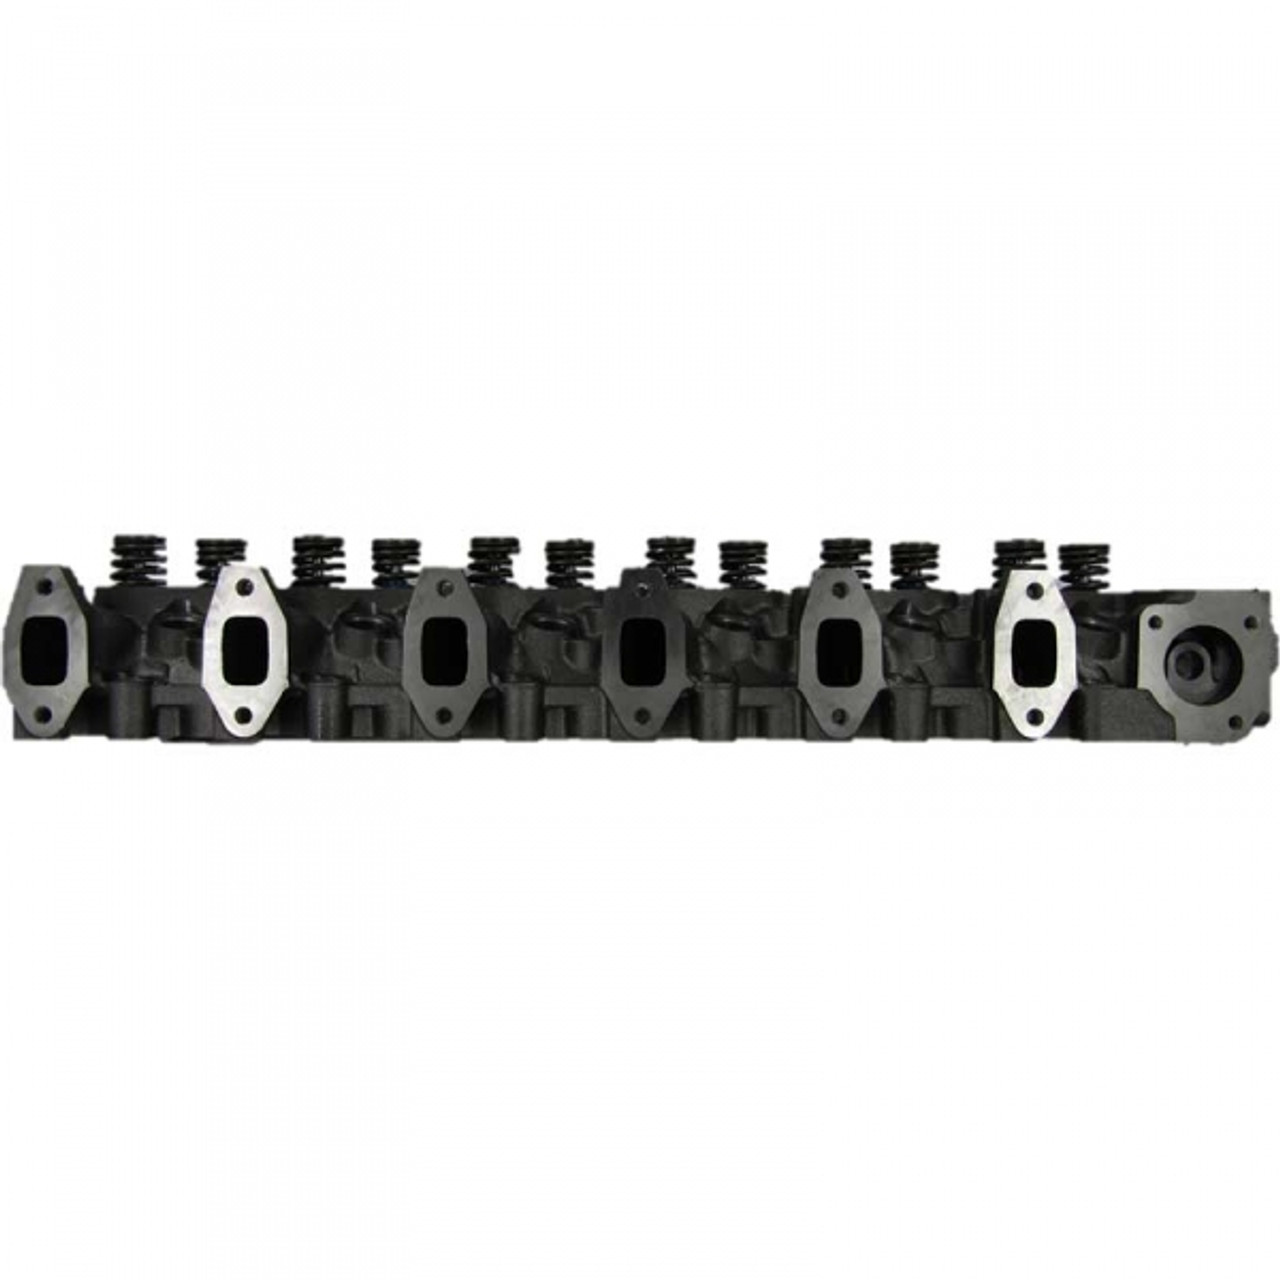 POWERSTROKE PRODUCTS LOADED STOCK O-RING 12V CUMMINS CYLINDER HEAD- Parallel View